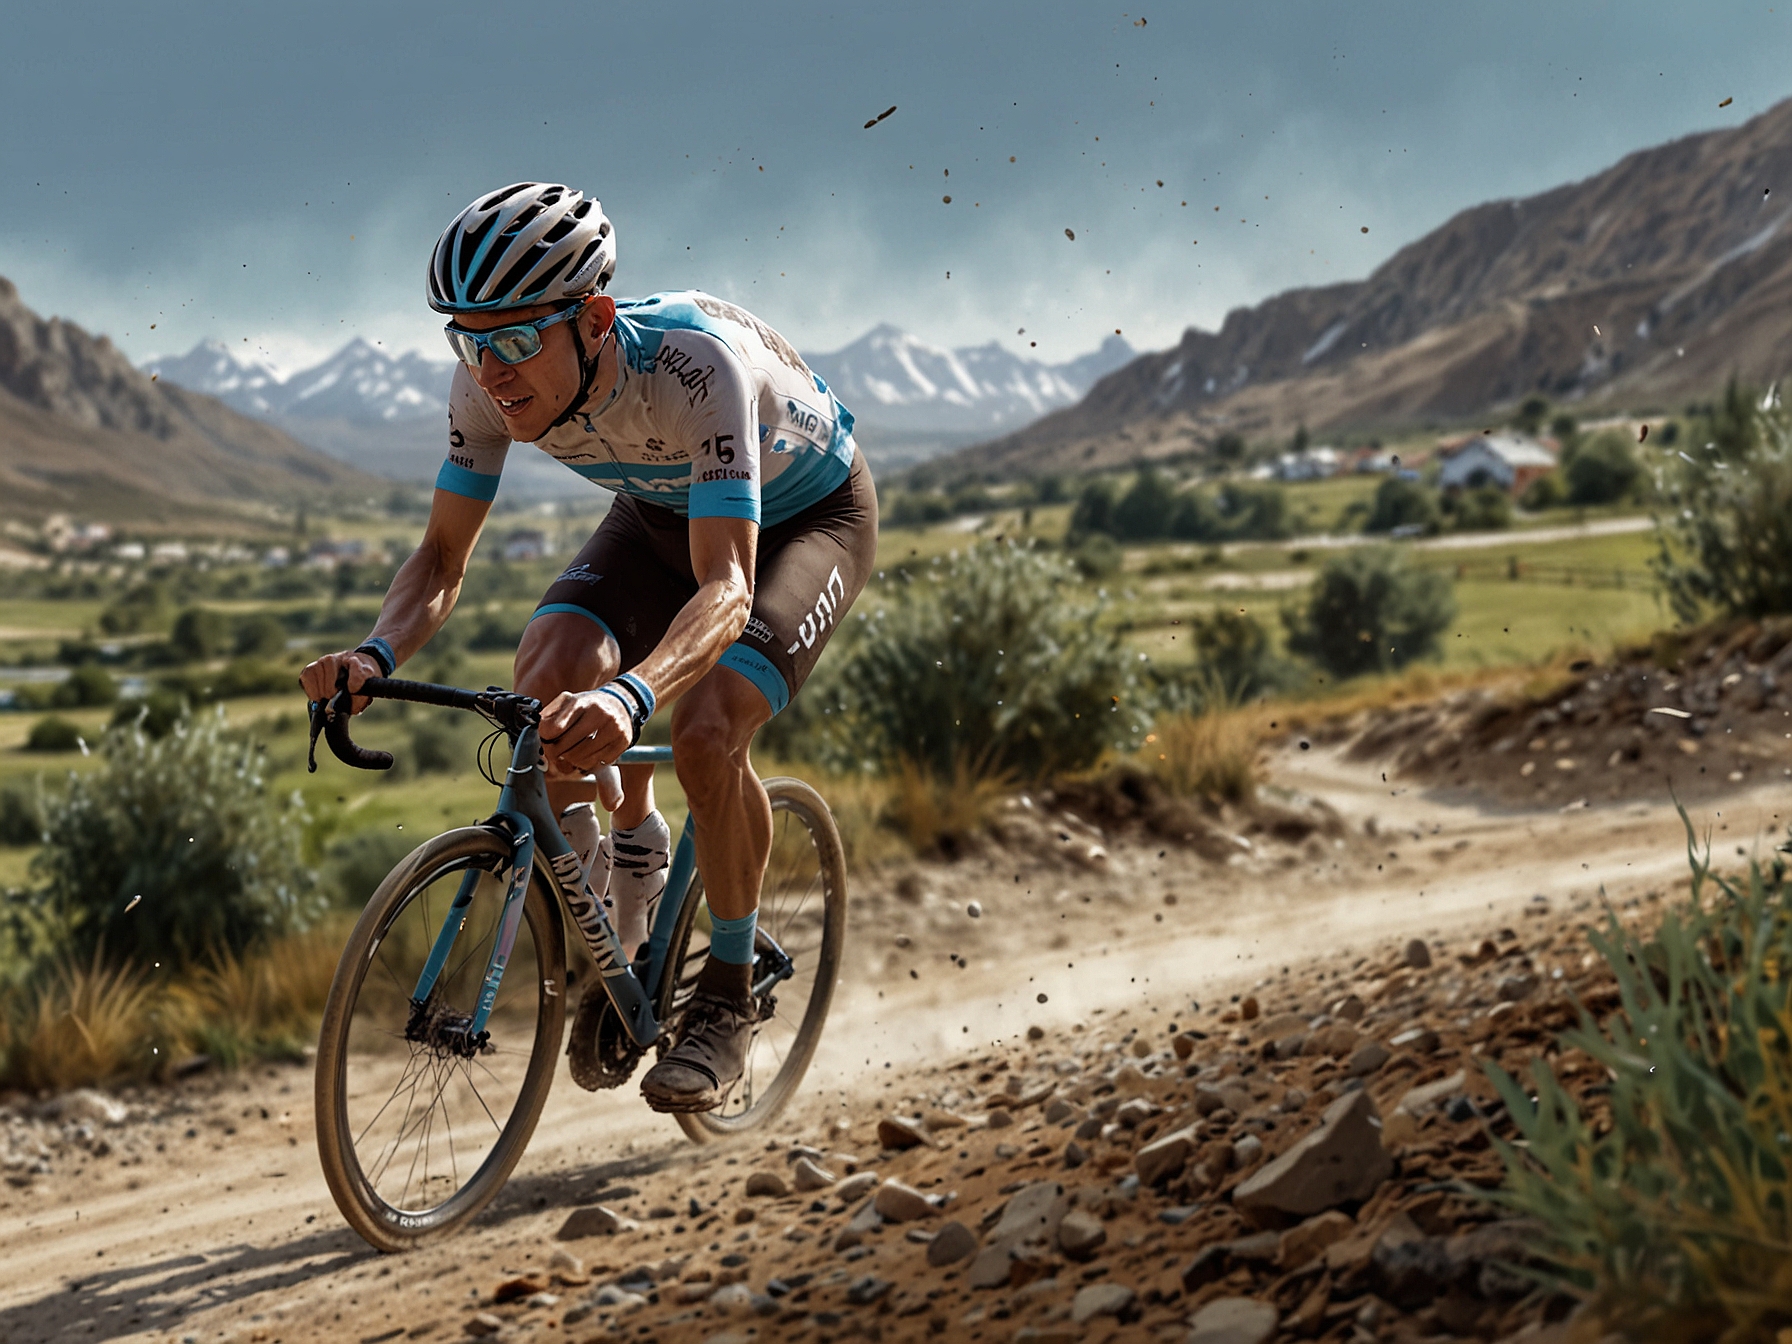 Romain Bardet rides through a challenging gravel course, showcasing his transition from road to gravel racing in 2025, a move that marks a new career chapter for the French cyclist.